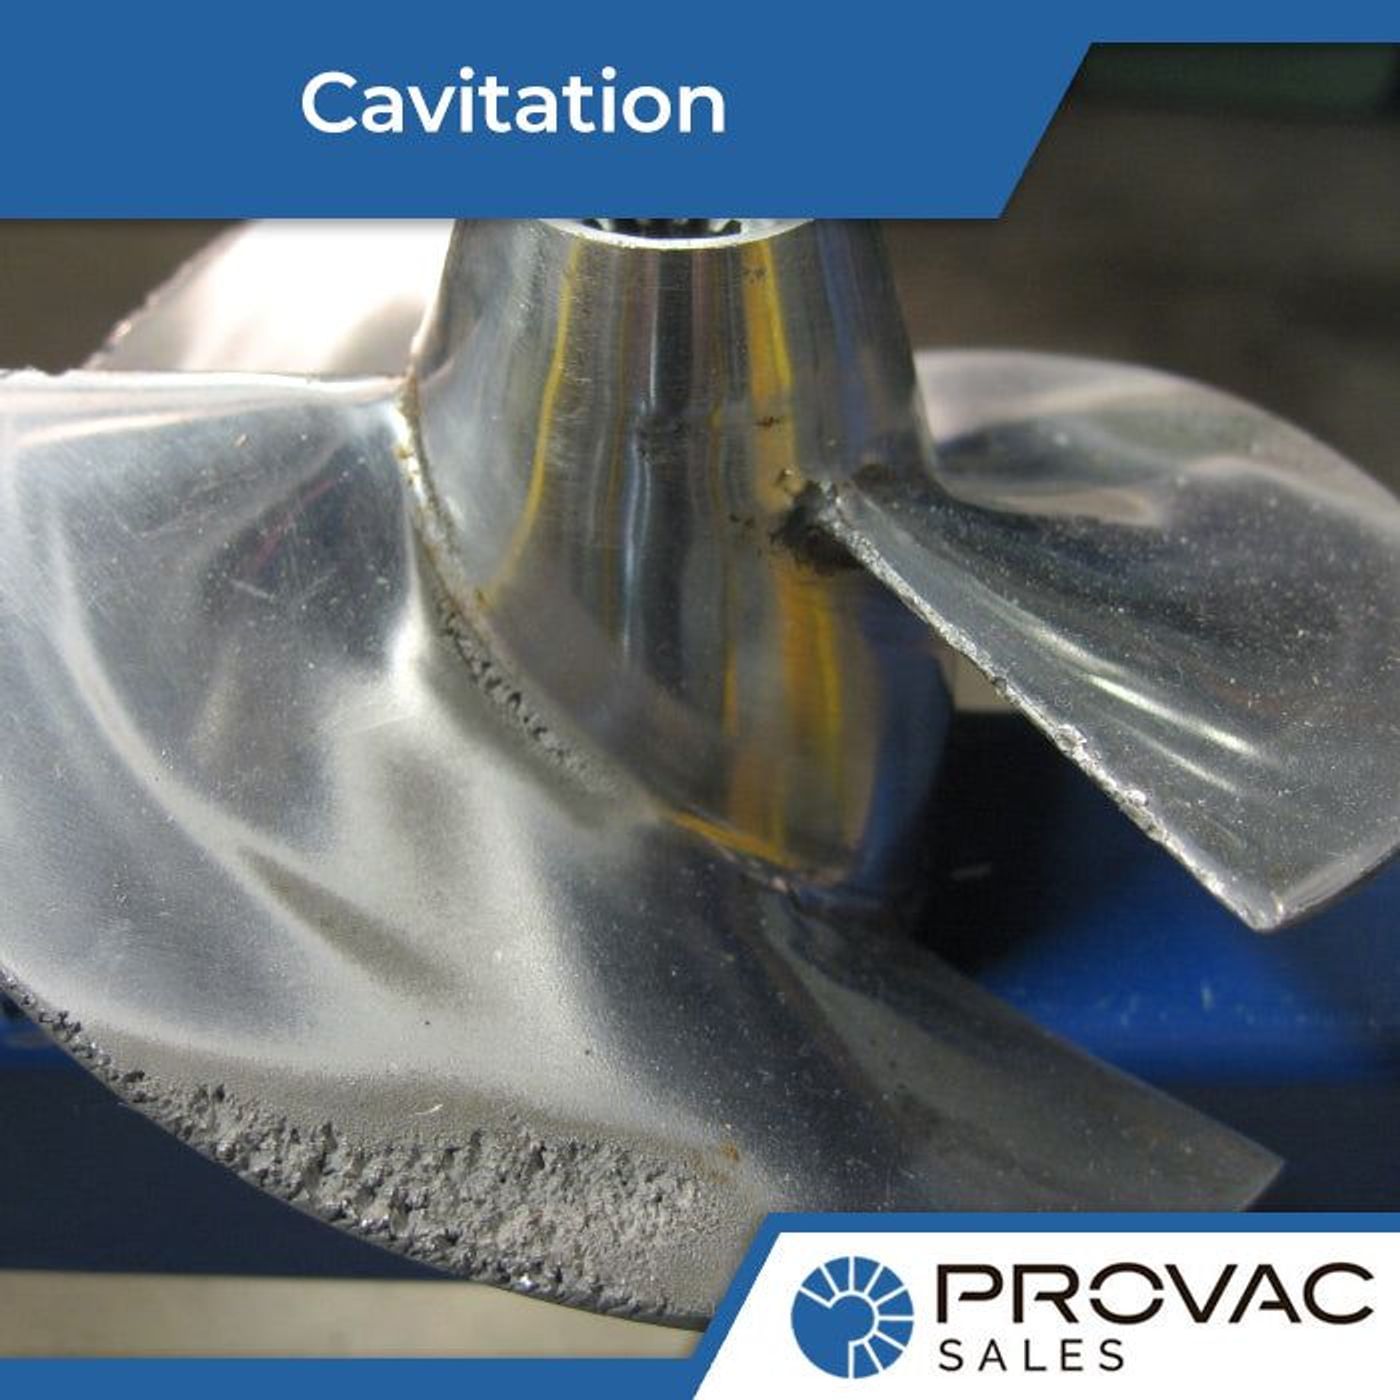 Cavitation In Pumps: Potential Causes & Solutions